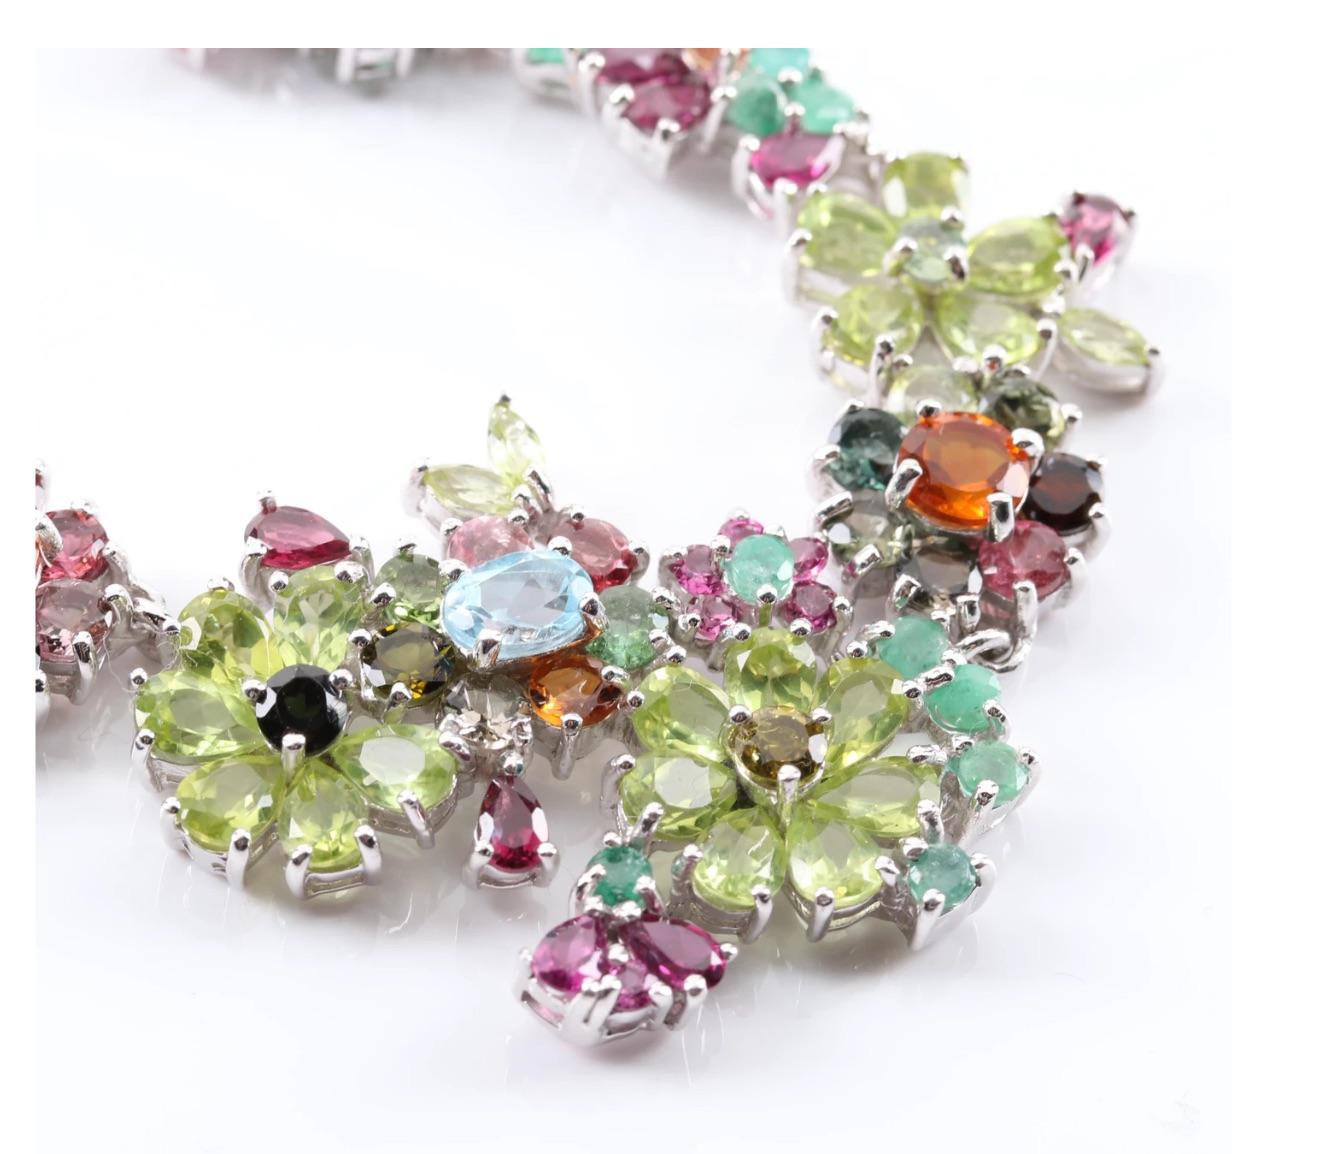 A most Incredibly Charming 34 carat Multi-Gemstone Necklace set in a Masterful Floral Design with 6 carats Tourmalines, 11 carats Peridots, 3.76 carats Garnet, 1.44 carats Sapphire, 1 carat Blue Topaz, 3.3 carats Emerald, 1.56 carats Citrine- 
with